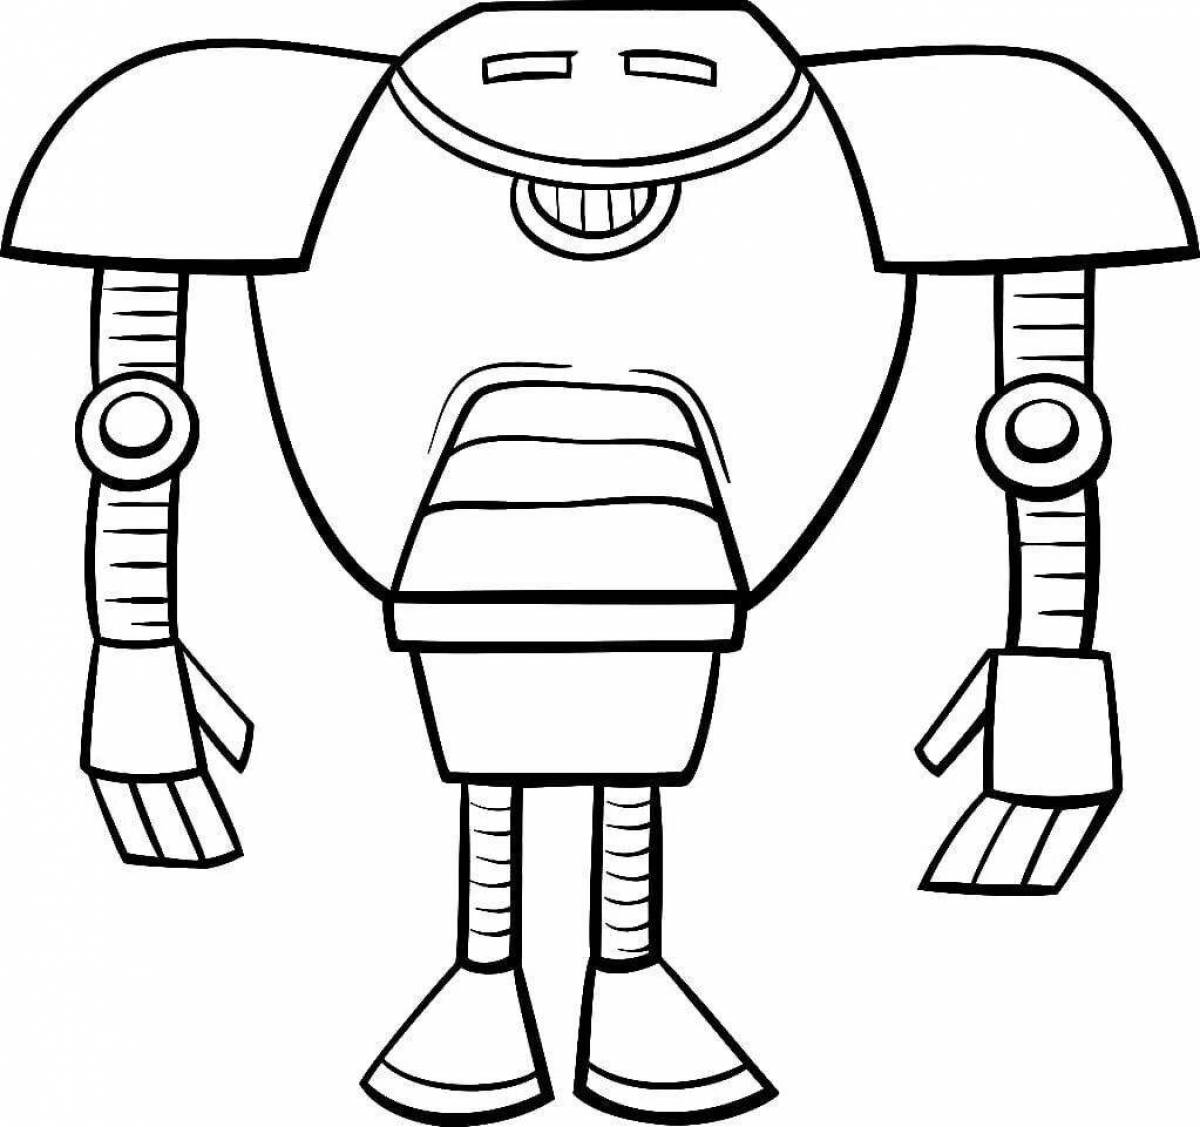 Robot sun animated coloring page